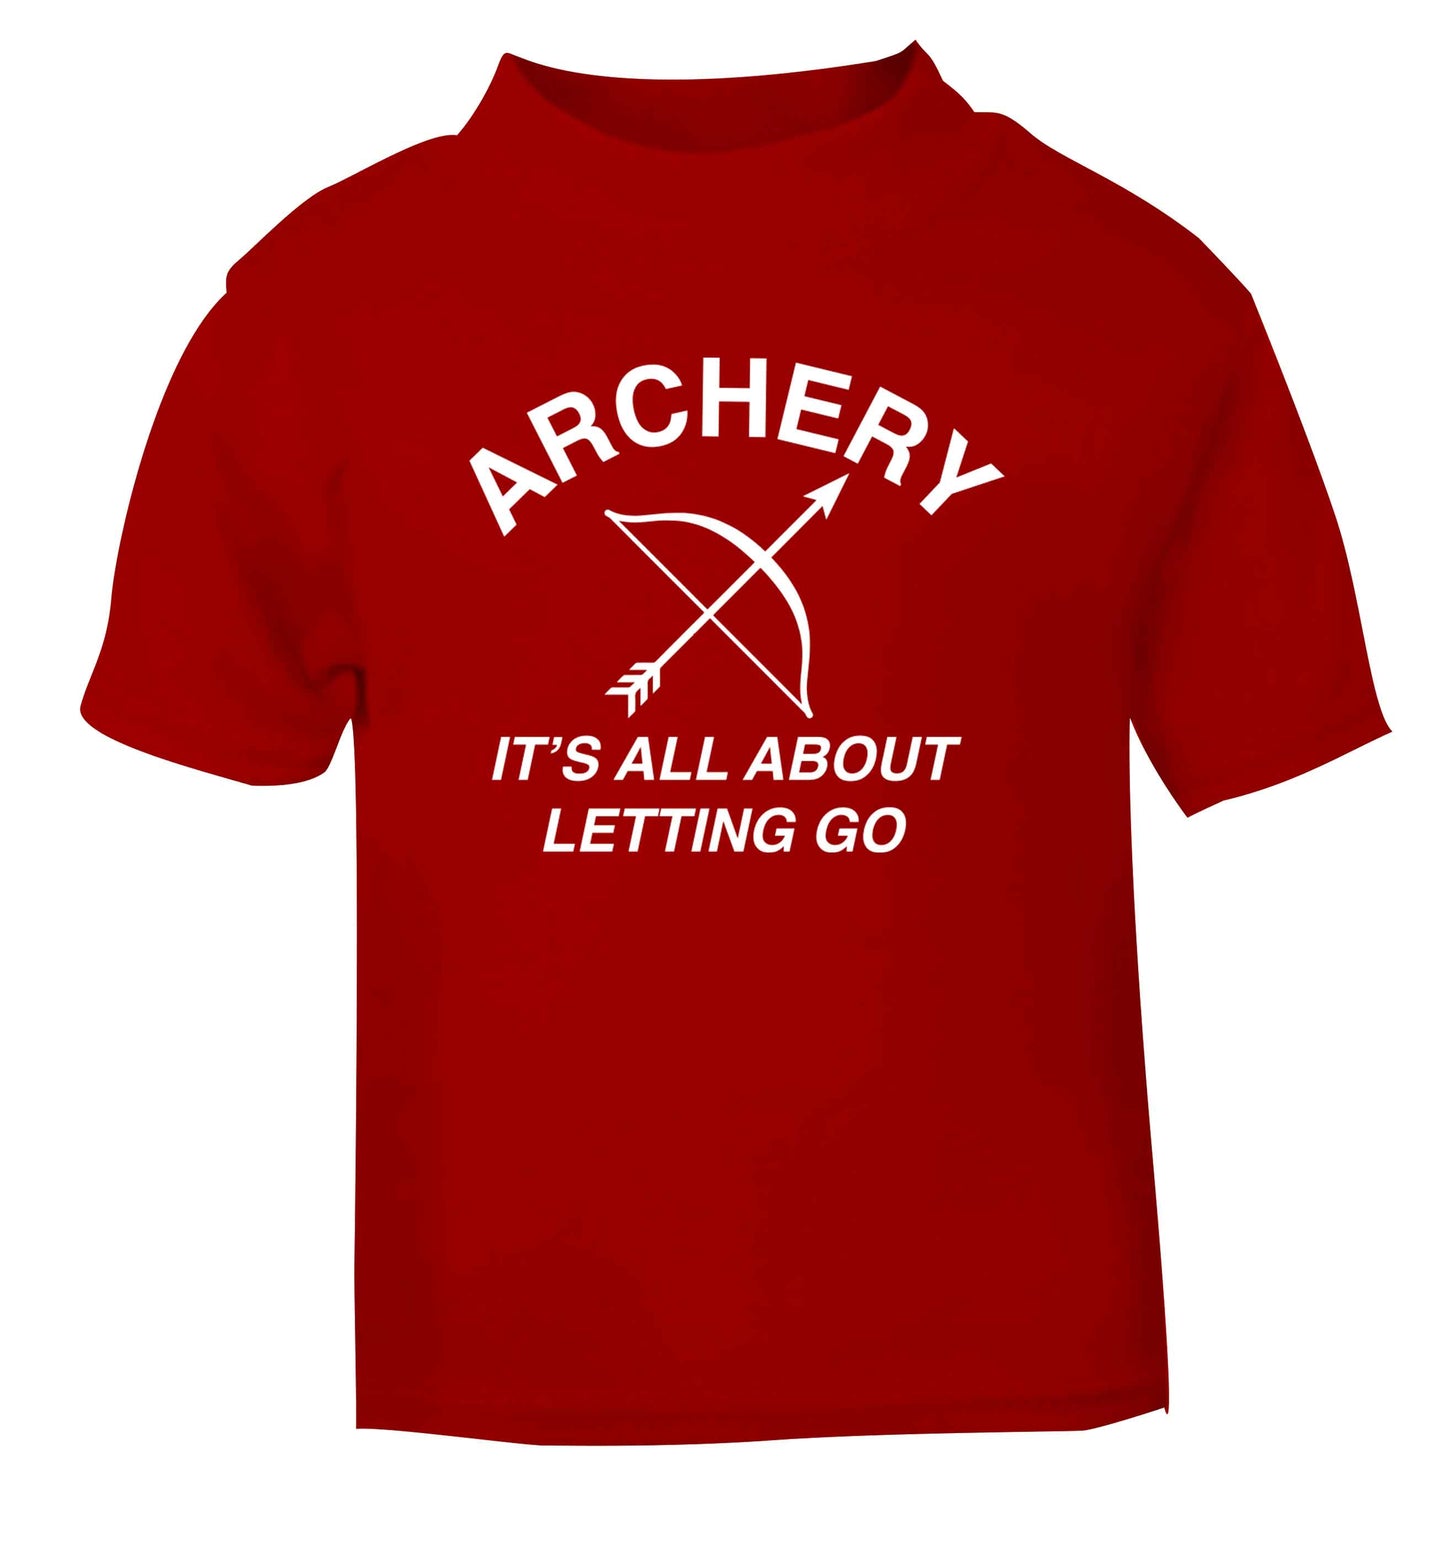 Archery it's all about letting go red Baby Toddler Tshirt 2 Years